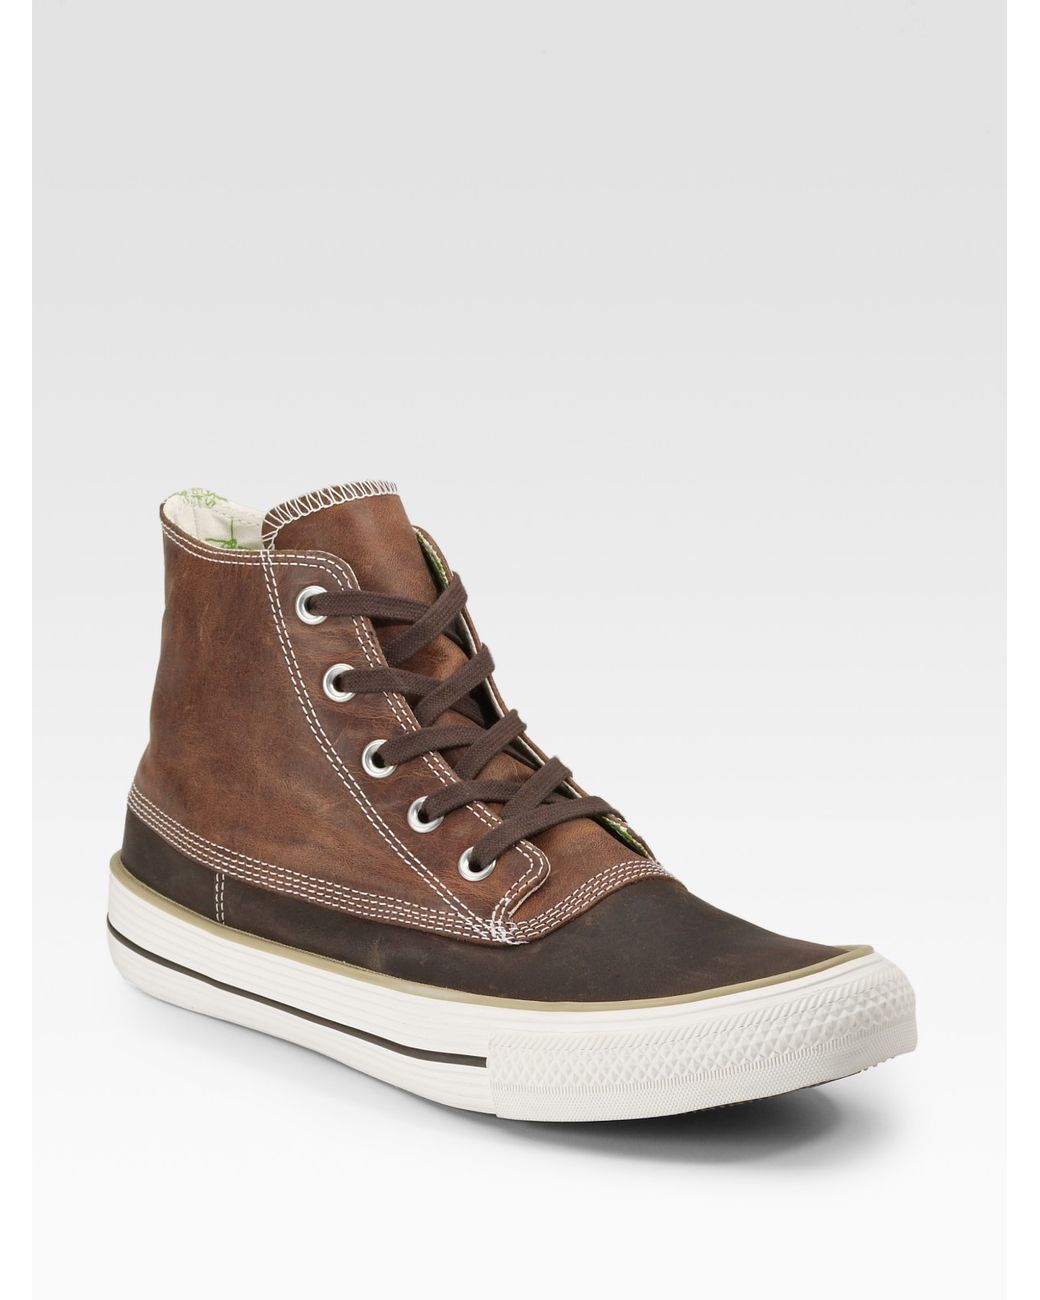 Converse Chuck Taylor Leather Duck Boots in Brown for Men | Lyst